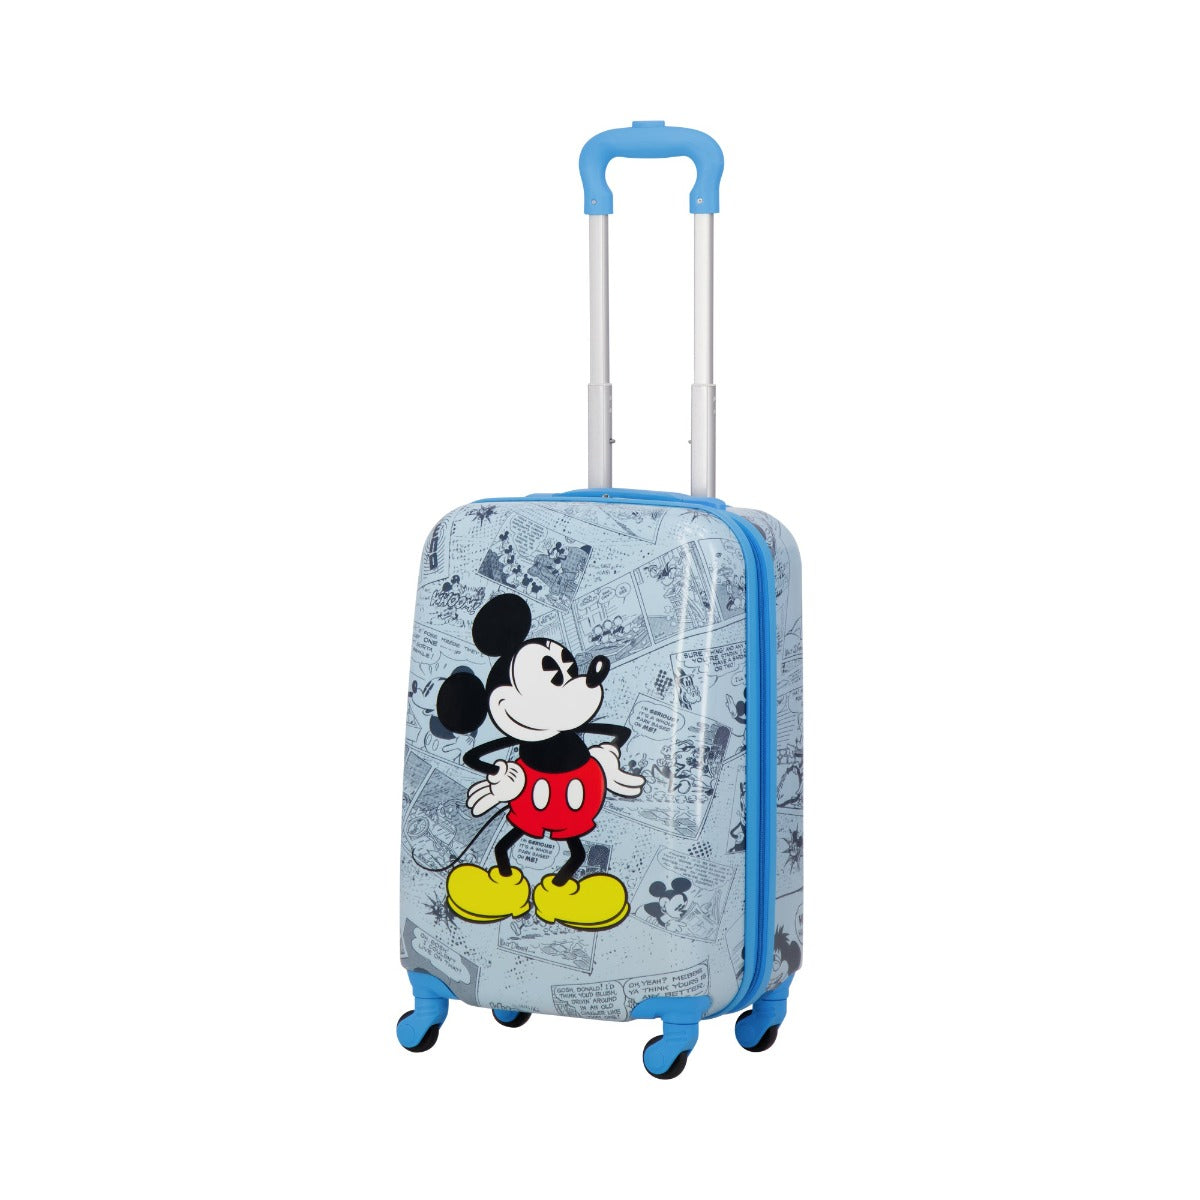 Blue Disney Ful Heritage Mickey Mouse 21" carry-on luggage for kids